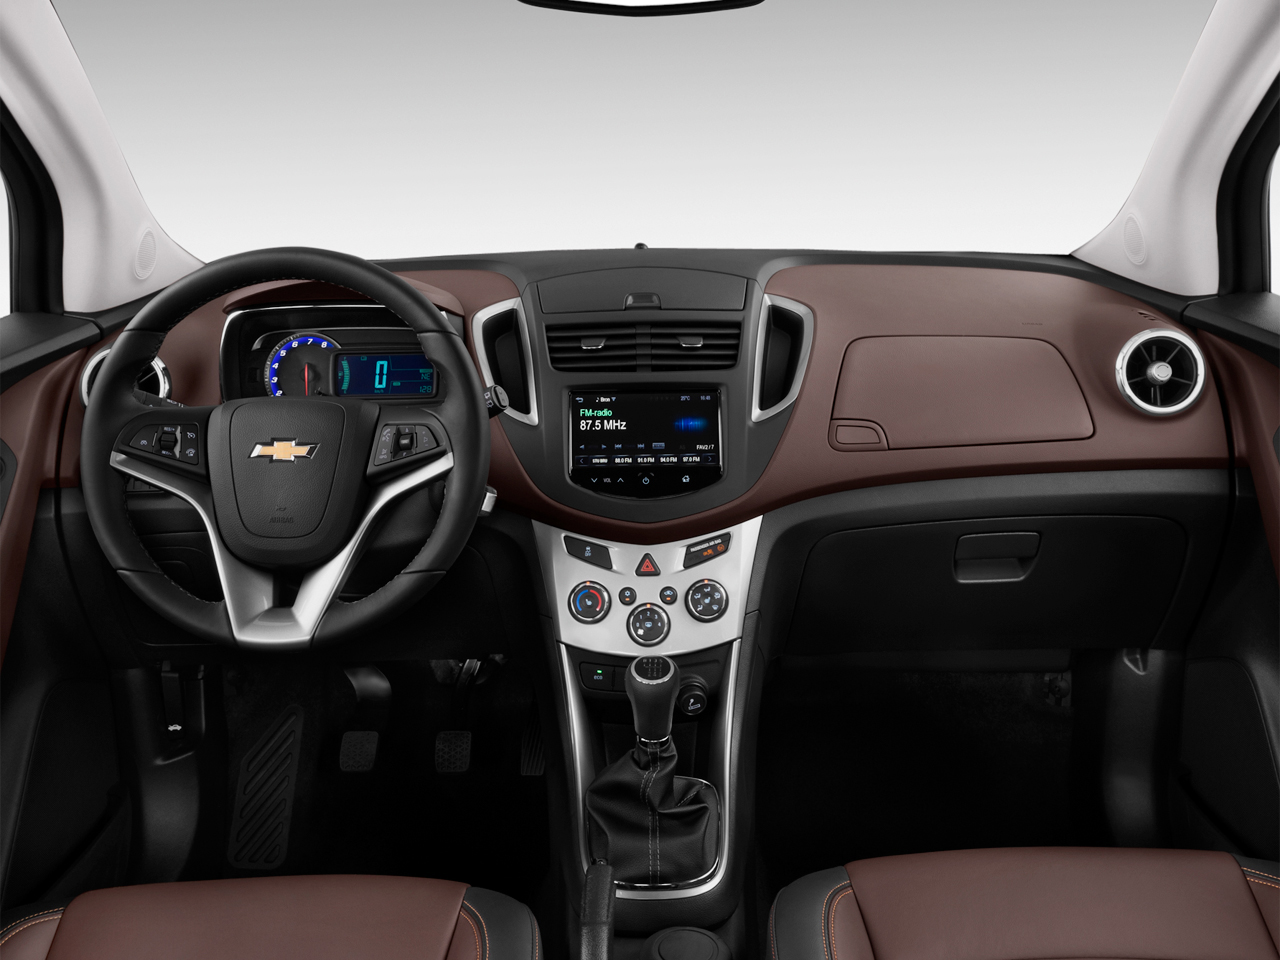 Chevrolet Trax Ls 2016 Interior Image Gallery Pictures Photos